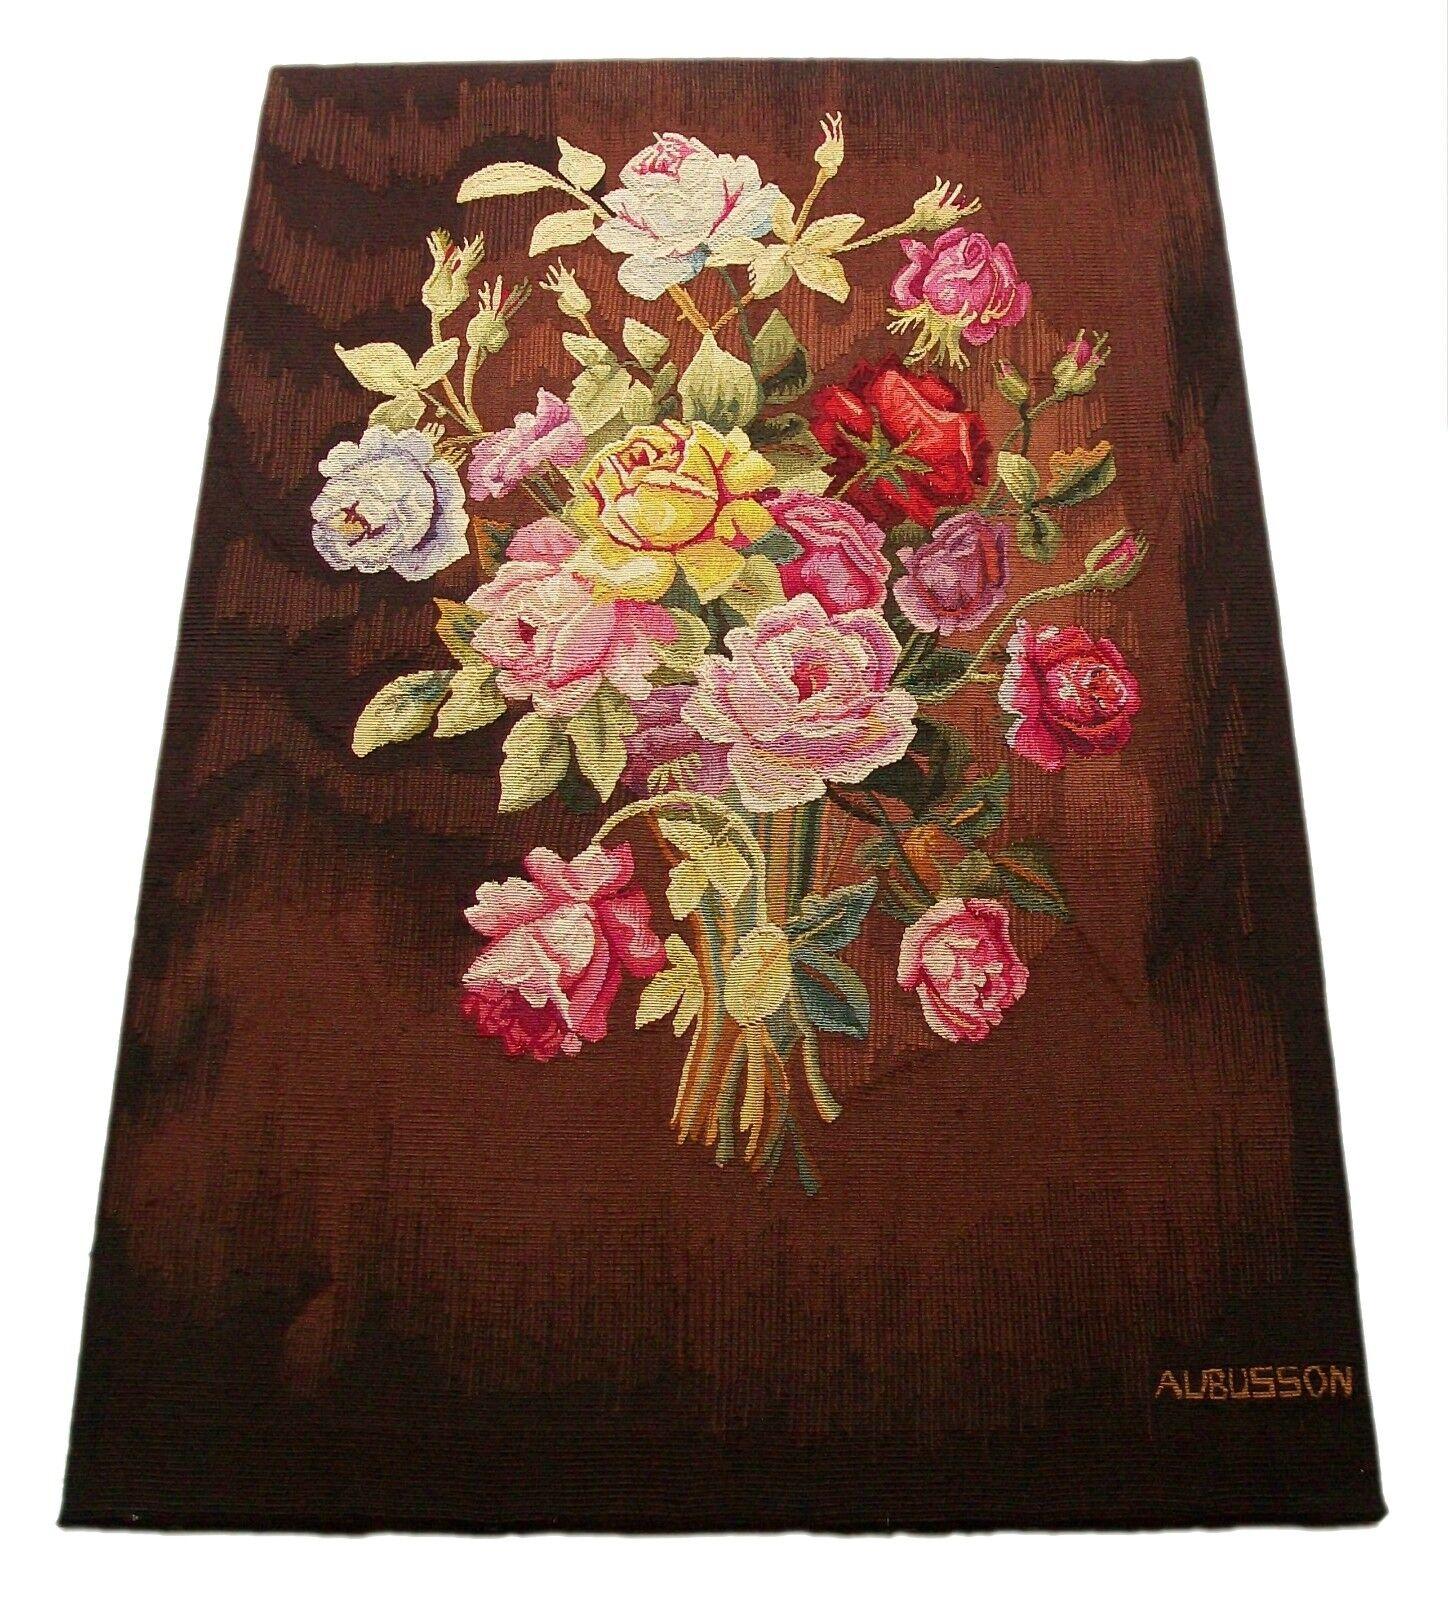 Hand-Woven Vintage Aubusson Floral Tapestry Panel, Wool & Silk, France, Mid 20th Century For Sale